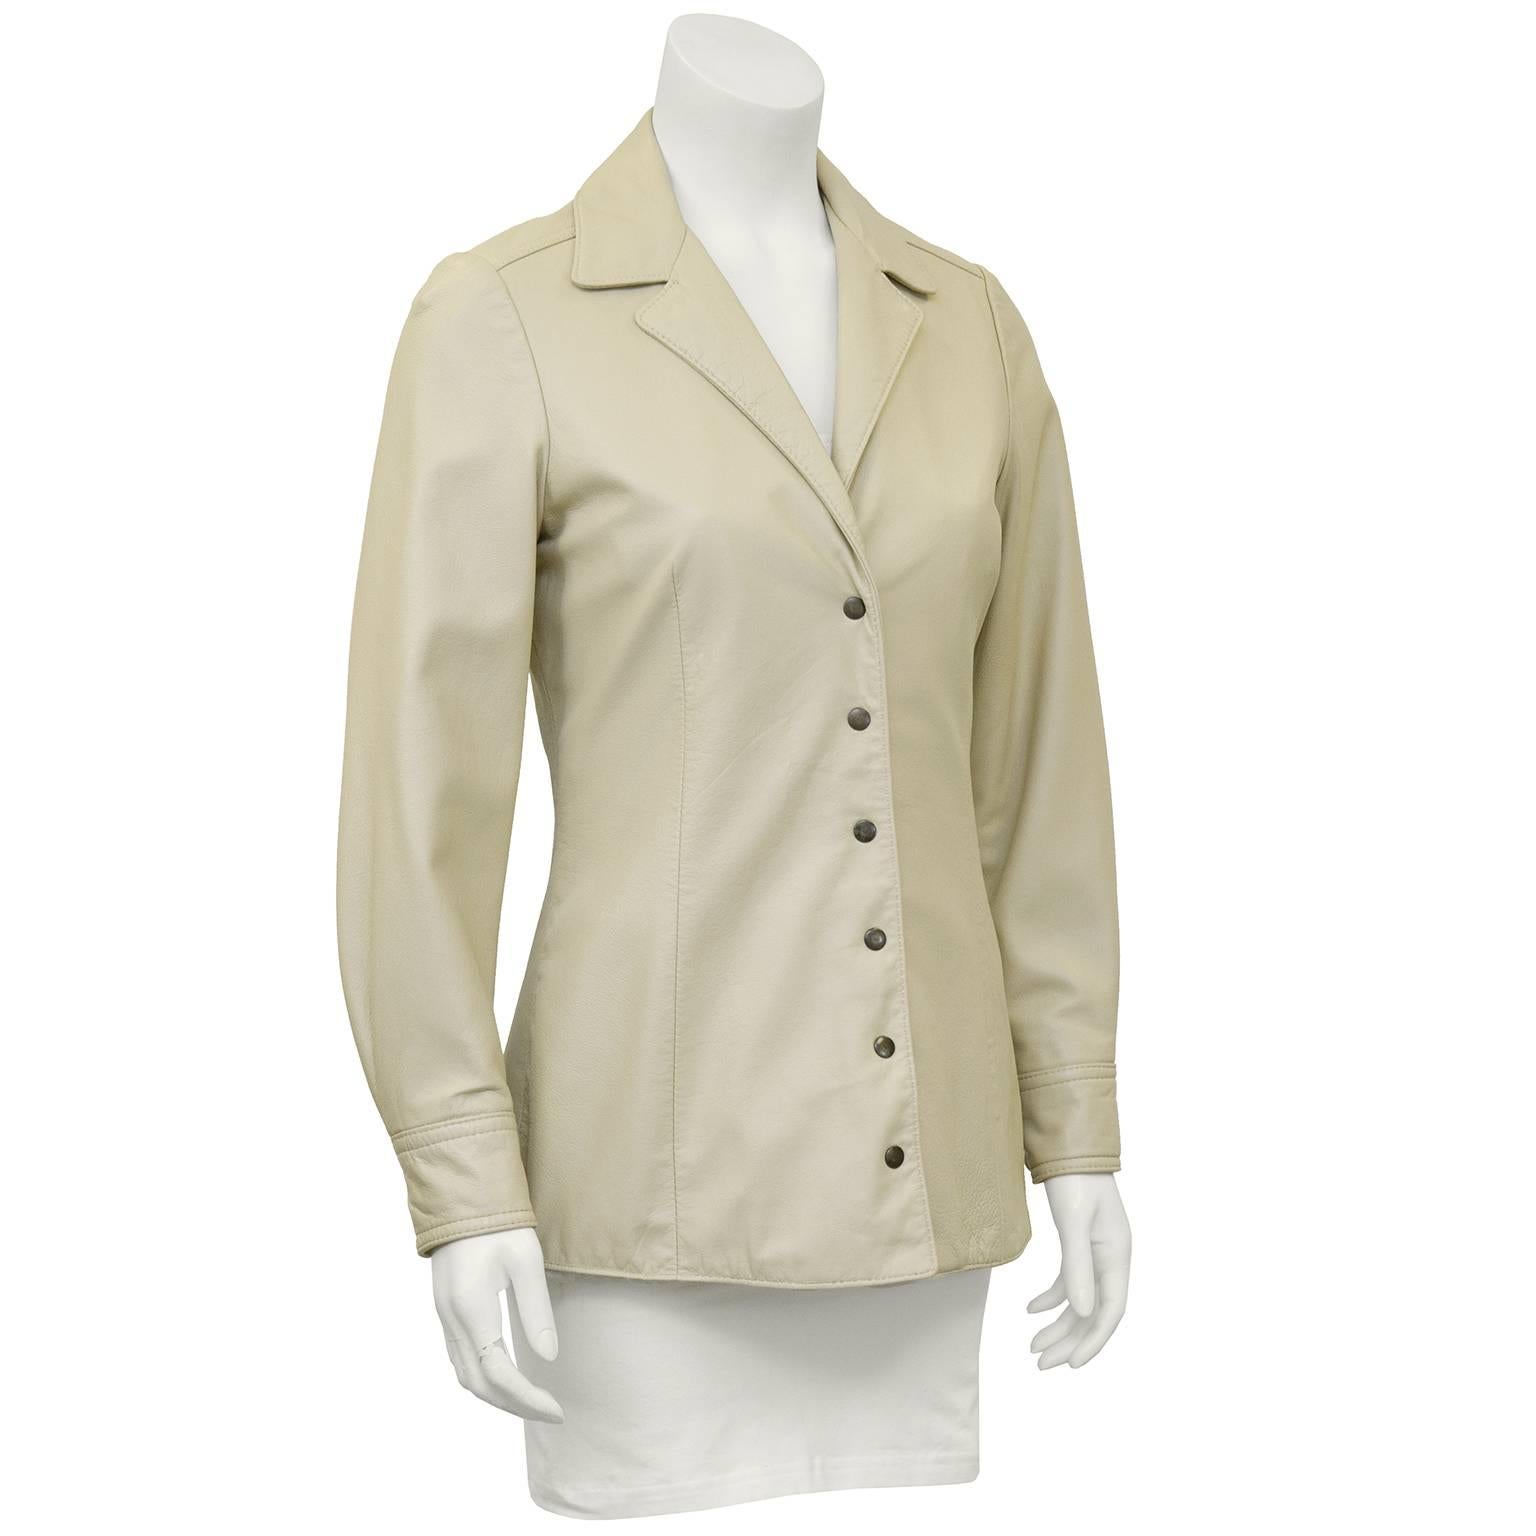 1970s Anne Klein beige leather jacket. Form fitting with snap closures. Seaming throughout gives it a beautiful shape. Lined in the matching beige satin. Excellent vintage condition. Fits like a US 4. 

Sleeve 17" Shoulder 32" Bust